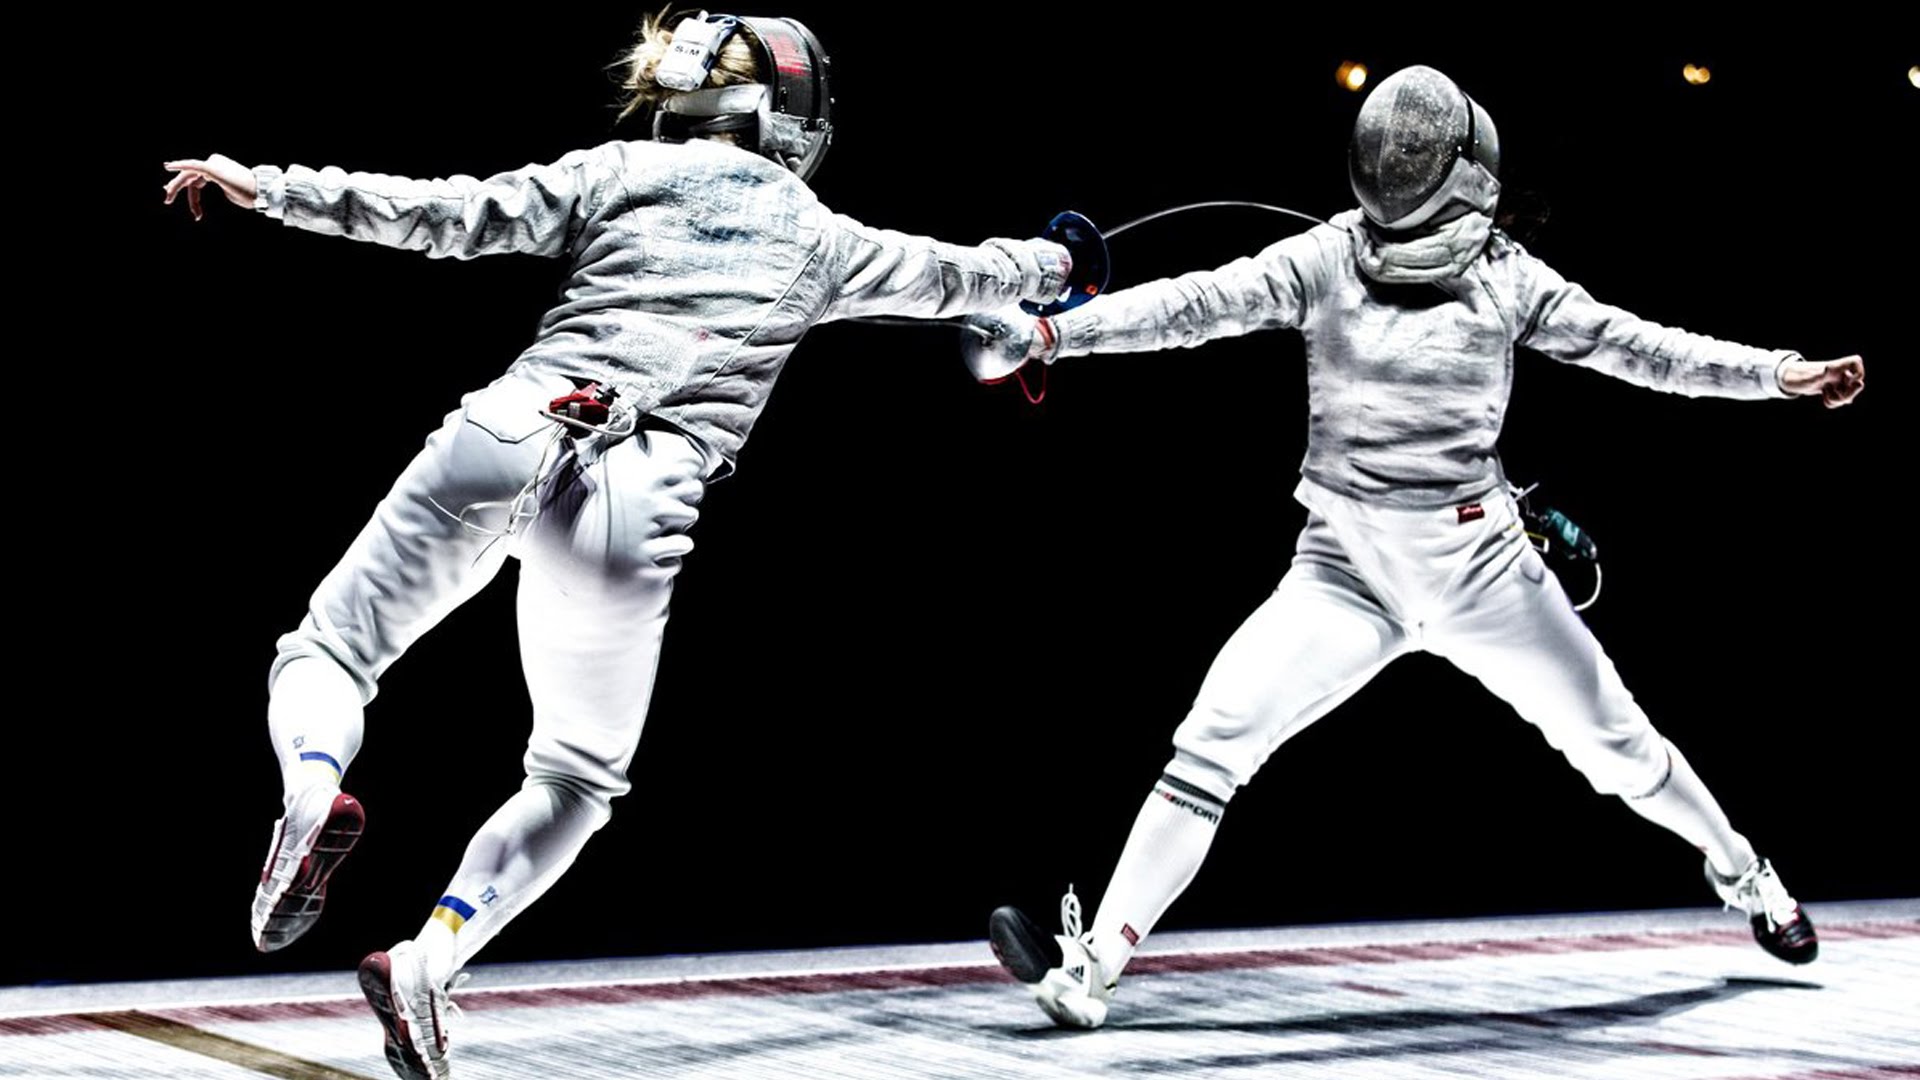 The Physics and Speed of Fencing - YouTube